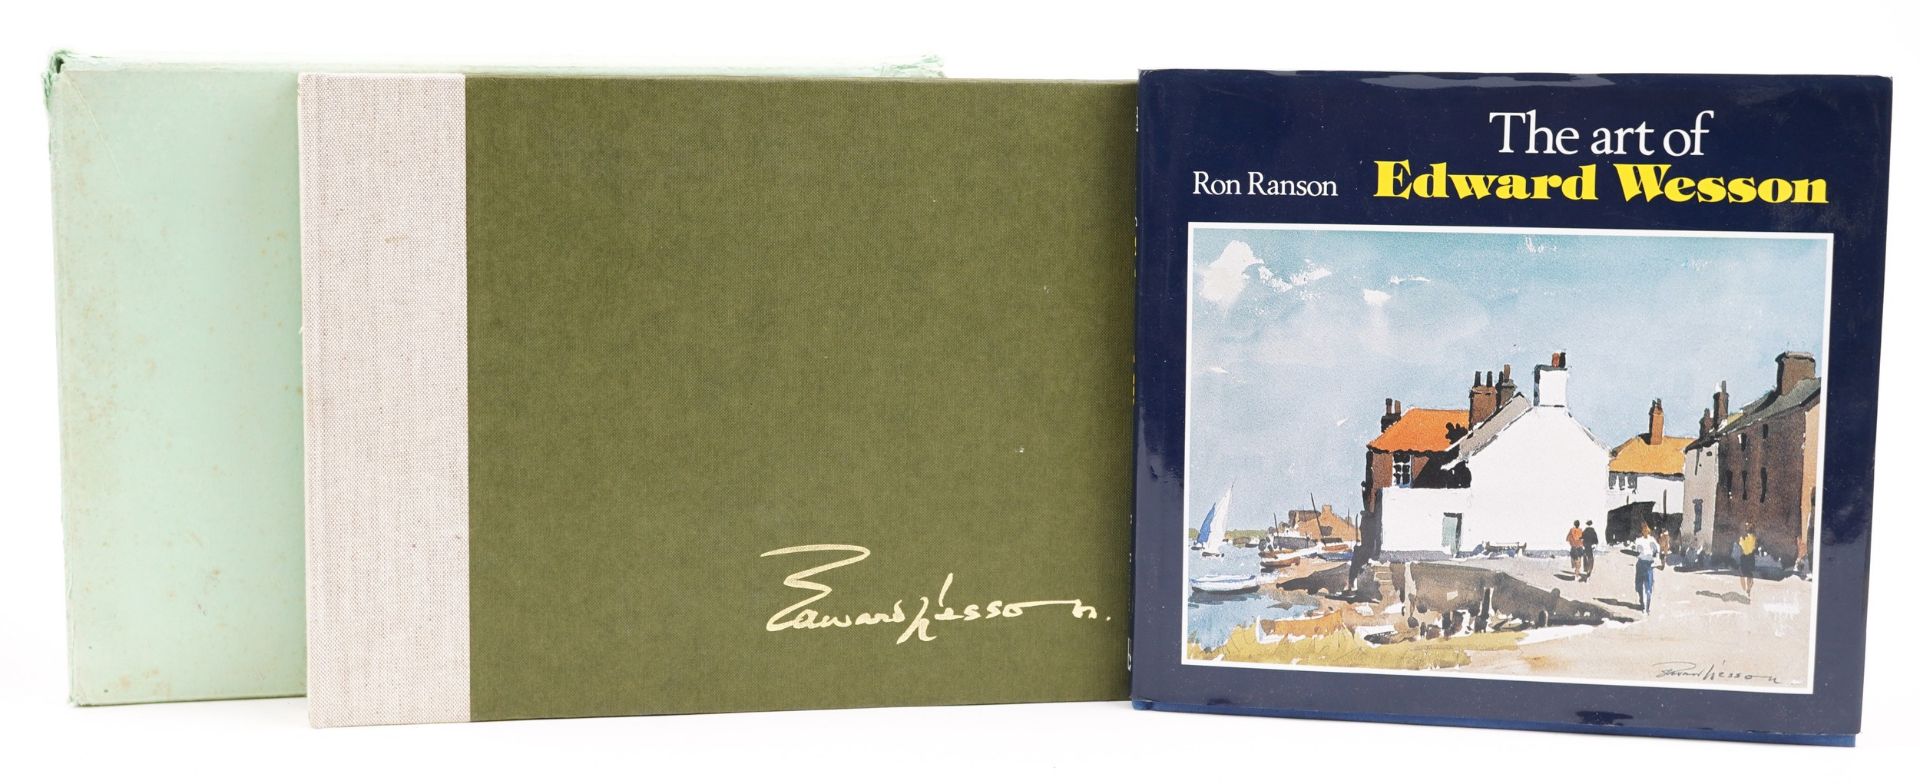 Two Edward Wesson related hardback books comprising The Art of Edward Wesson by Ron Ranson and My